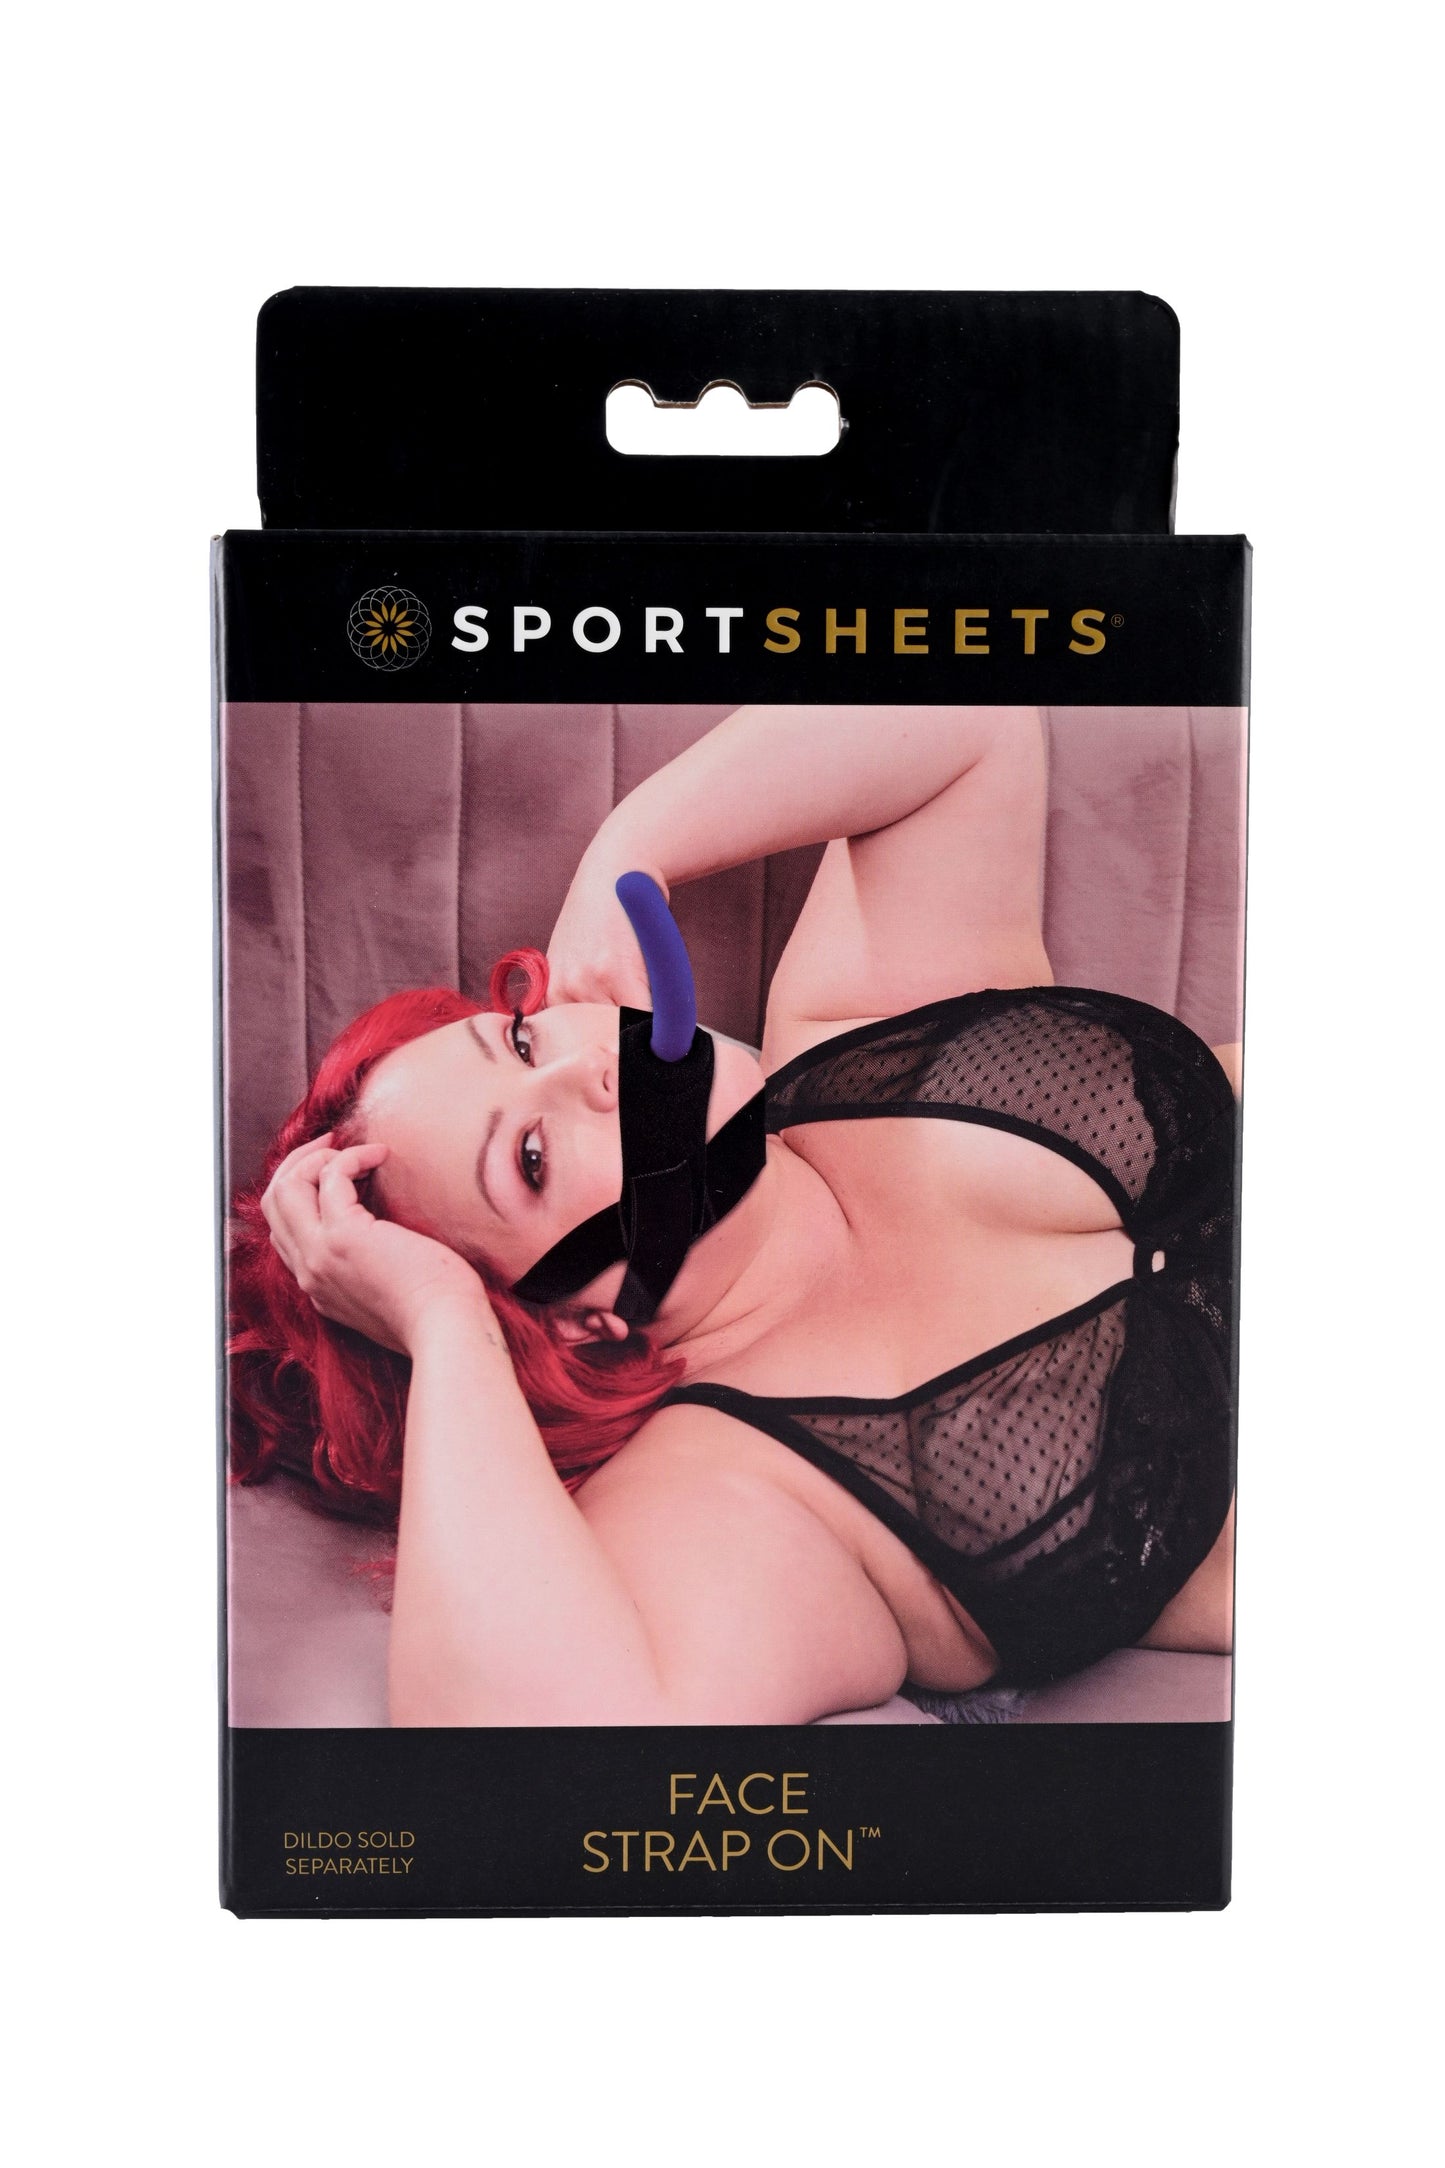 Sportsheets Face Strap-On in its box (dildo not included).